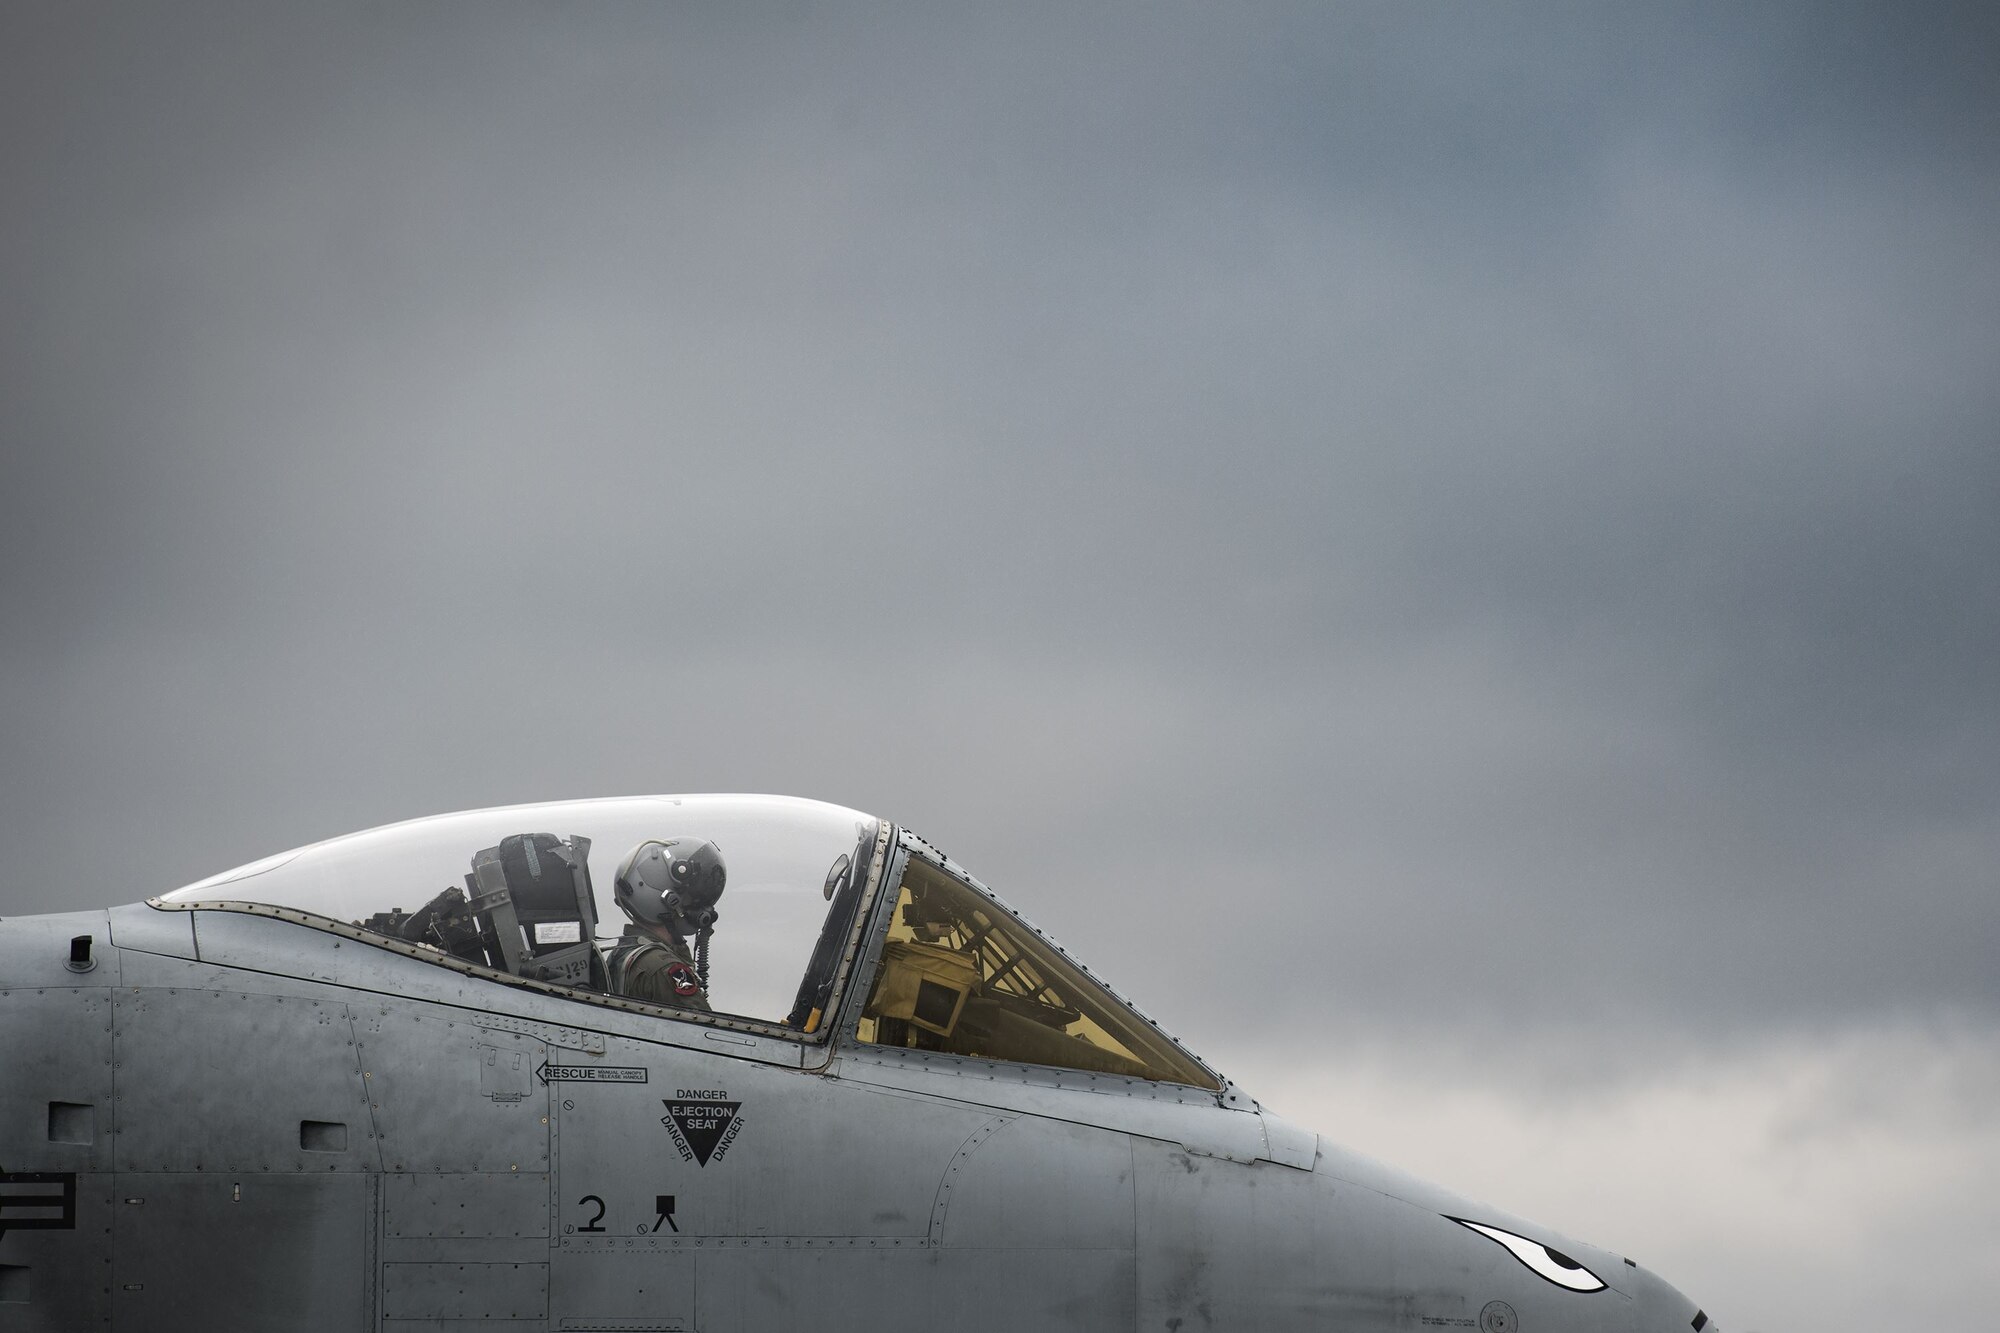 A pilot from the 75th Fighter Squadron taxis an A-10C Thunderbolt II towards the runway, Dec. 6, 2017, at Moody Air Force Base, Ga. Moody’s week-long, Phase 1, Phase 2 exercise is designed to demonstrate the 23d Wing’s ability to meet combatant commander objectives and tested the pilots’ and maintainers’ ability to launch around-the-clock sorties at an accelerated rate during a sortie surge. (U.S. Air Force photo by Staff Sgt. Ryan Callaghan)